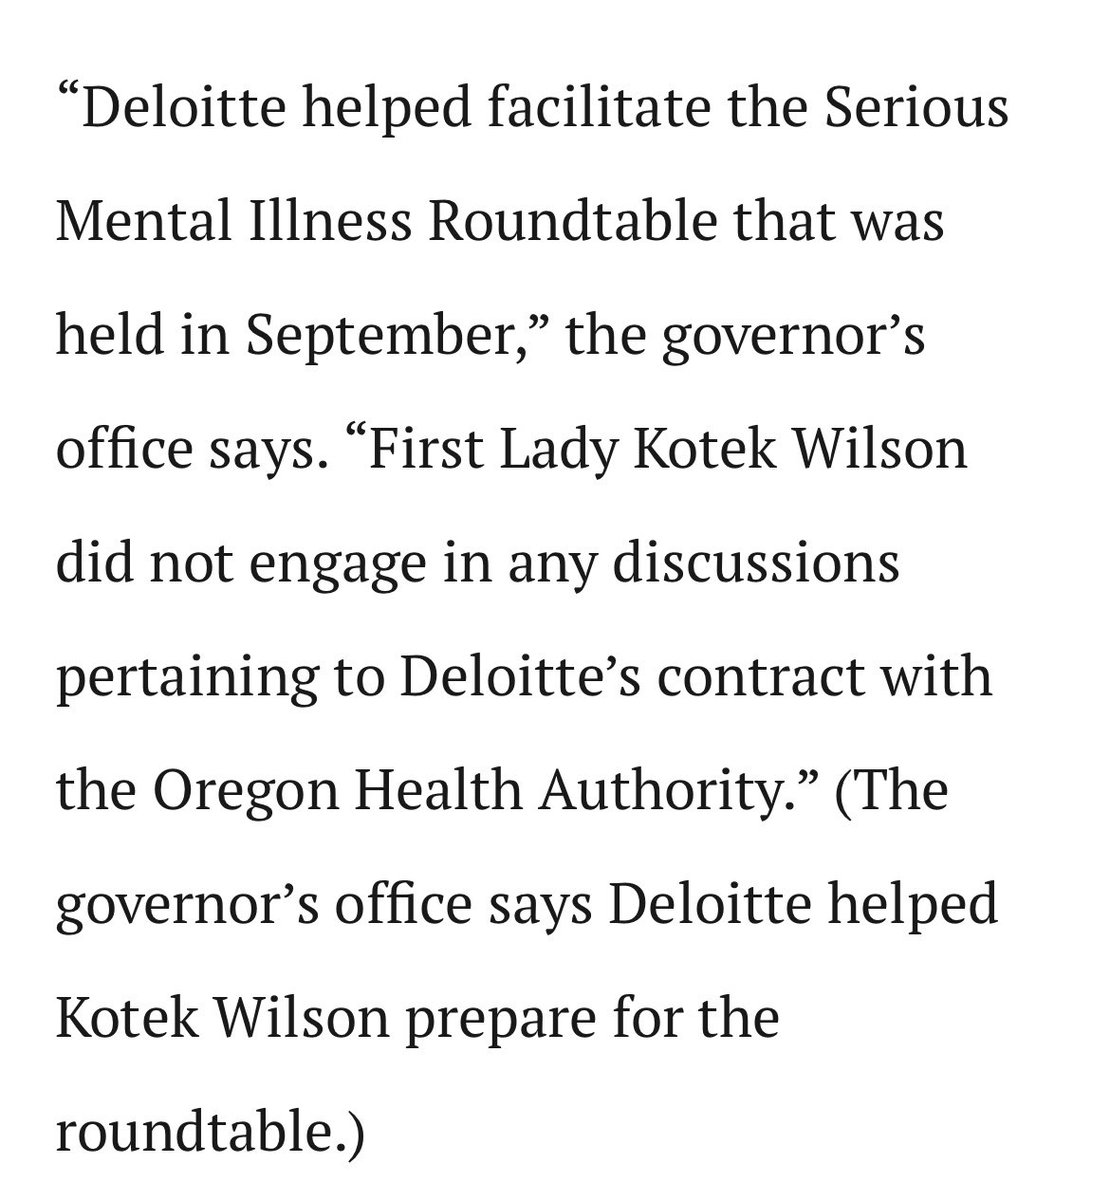 This is precisely why #PDX liberals like Gov Kulongoski, Thomas Lauderdale, Phil Knight & myself were urging you to vote 3rd party. Kotex = meetings, bureaucracy, no action, just talk & corruption. We can do better Oregon!